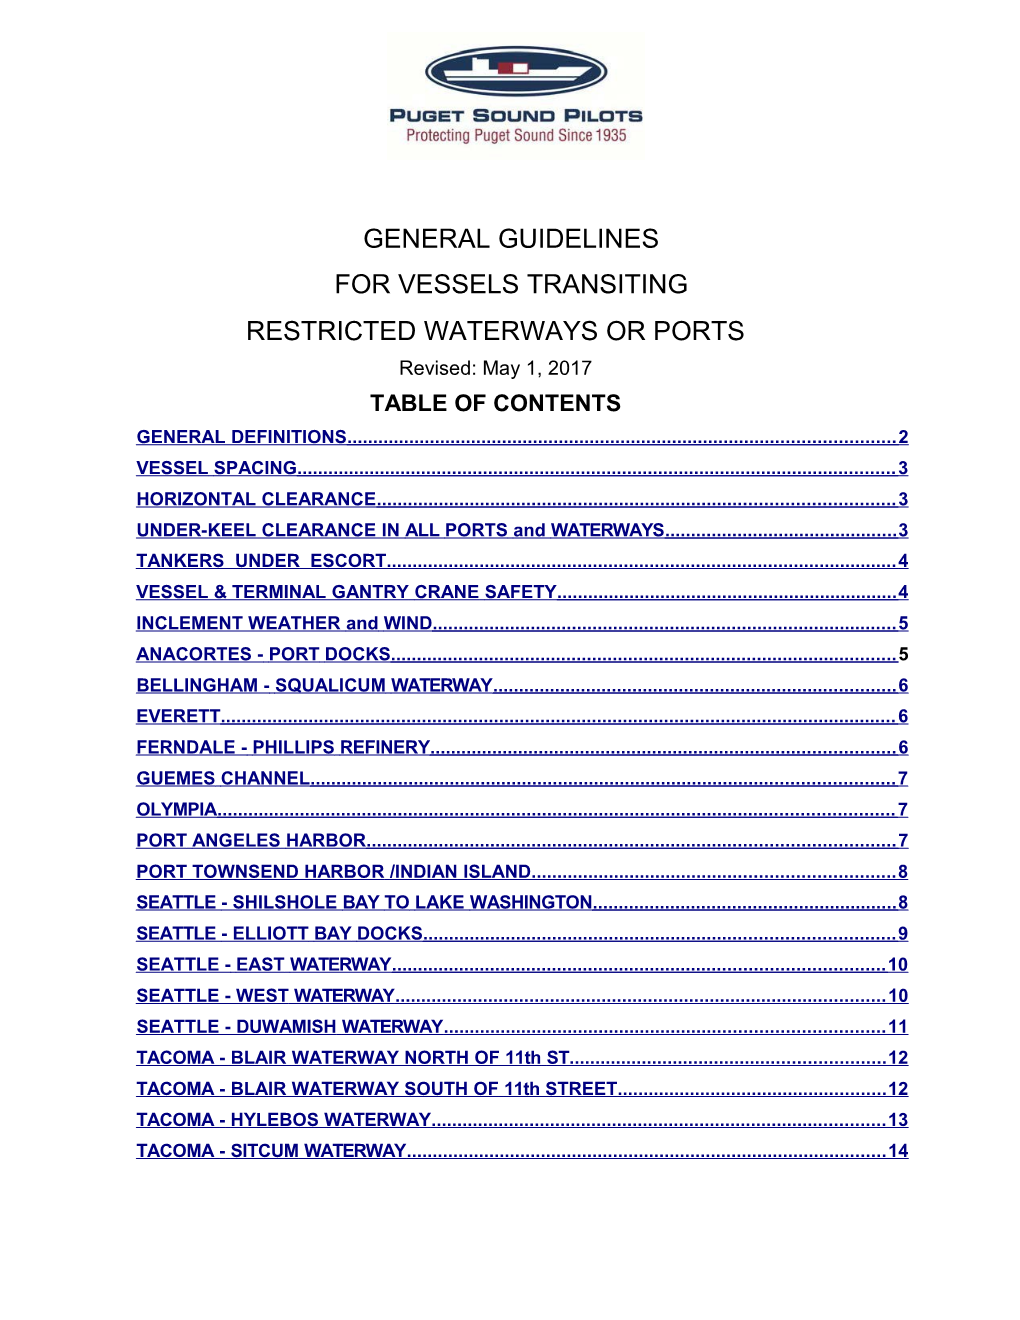 General Guidelines for Vessels Transiting